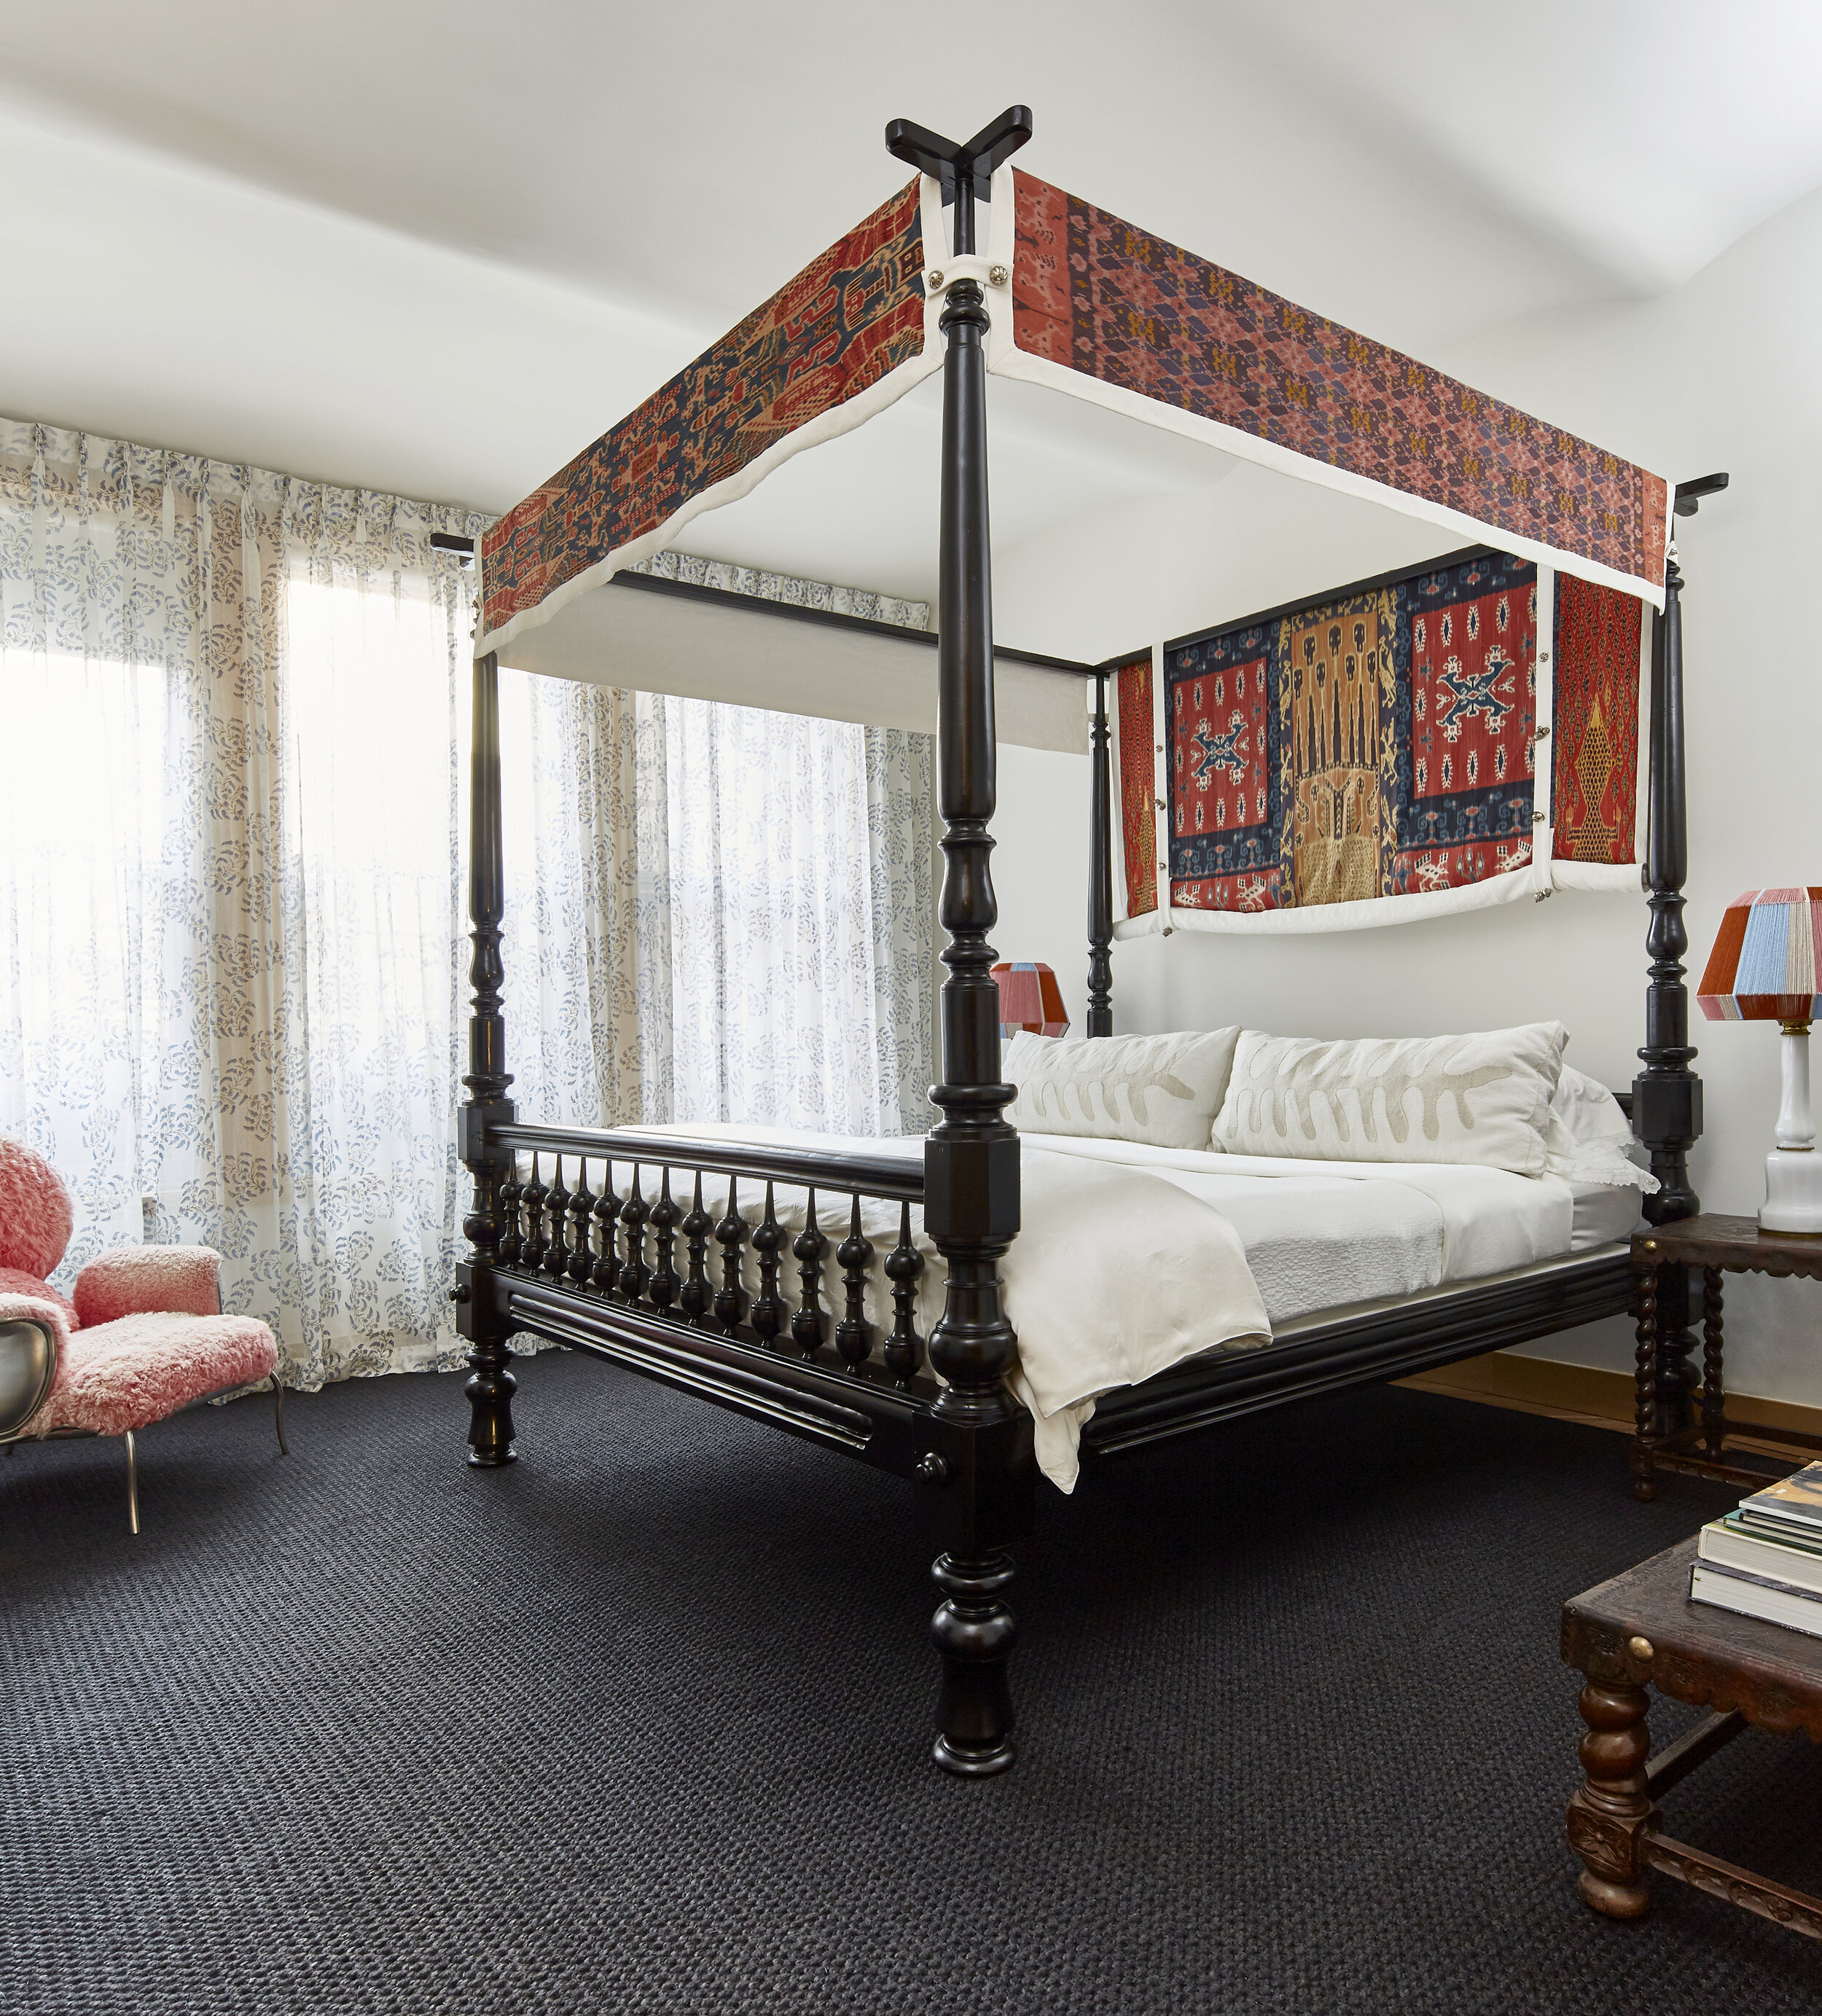 Cortina Black Diamond rug Merida Calcutta Bed Anglo Raj Antiques Ikat Panels Aamir LF Upholstery Leather Nightstands &amp; Bench from clients existing collection Custom Matisse Applique Pillow Combray